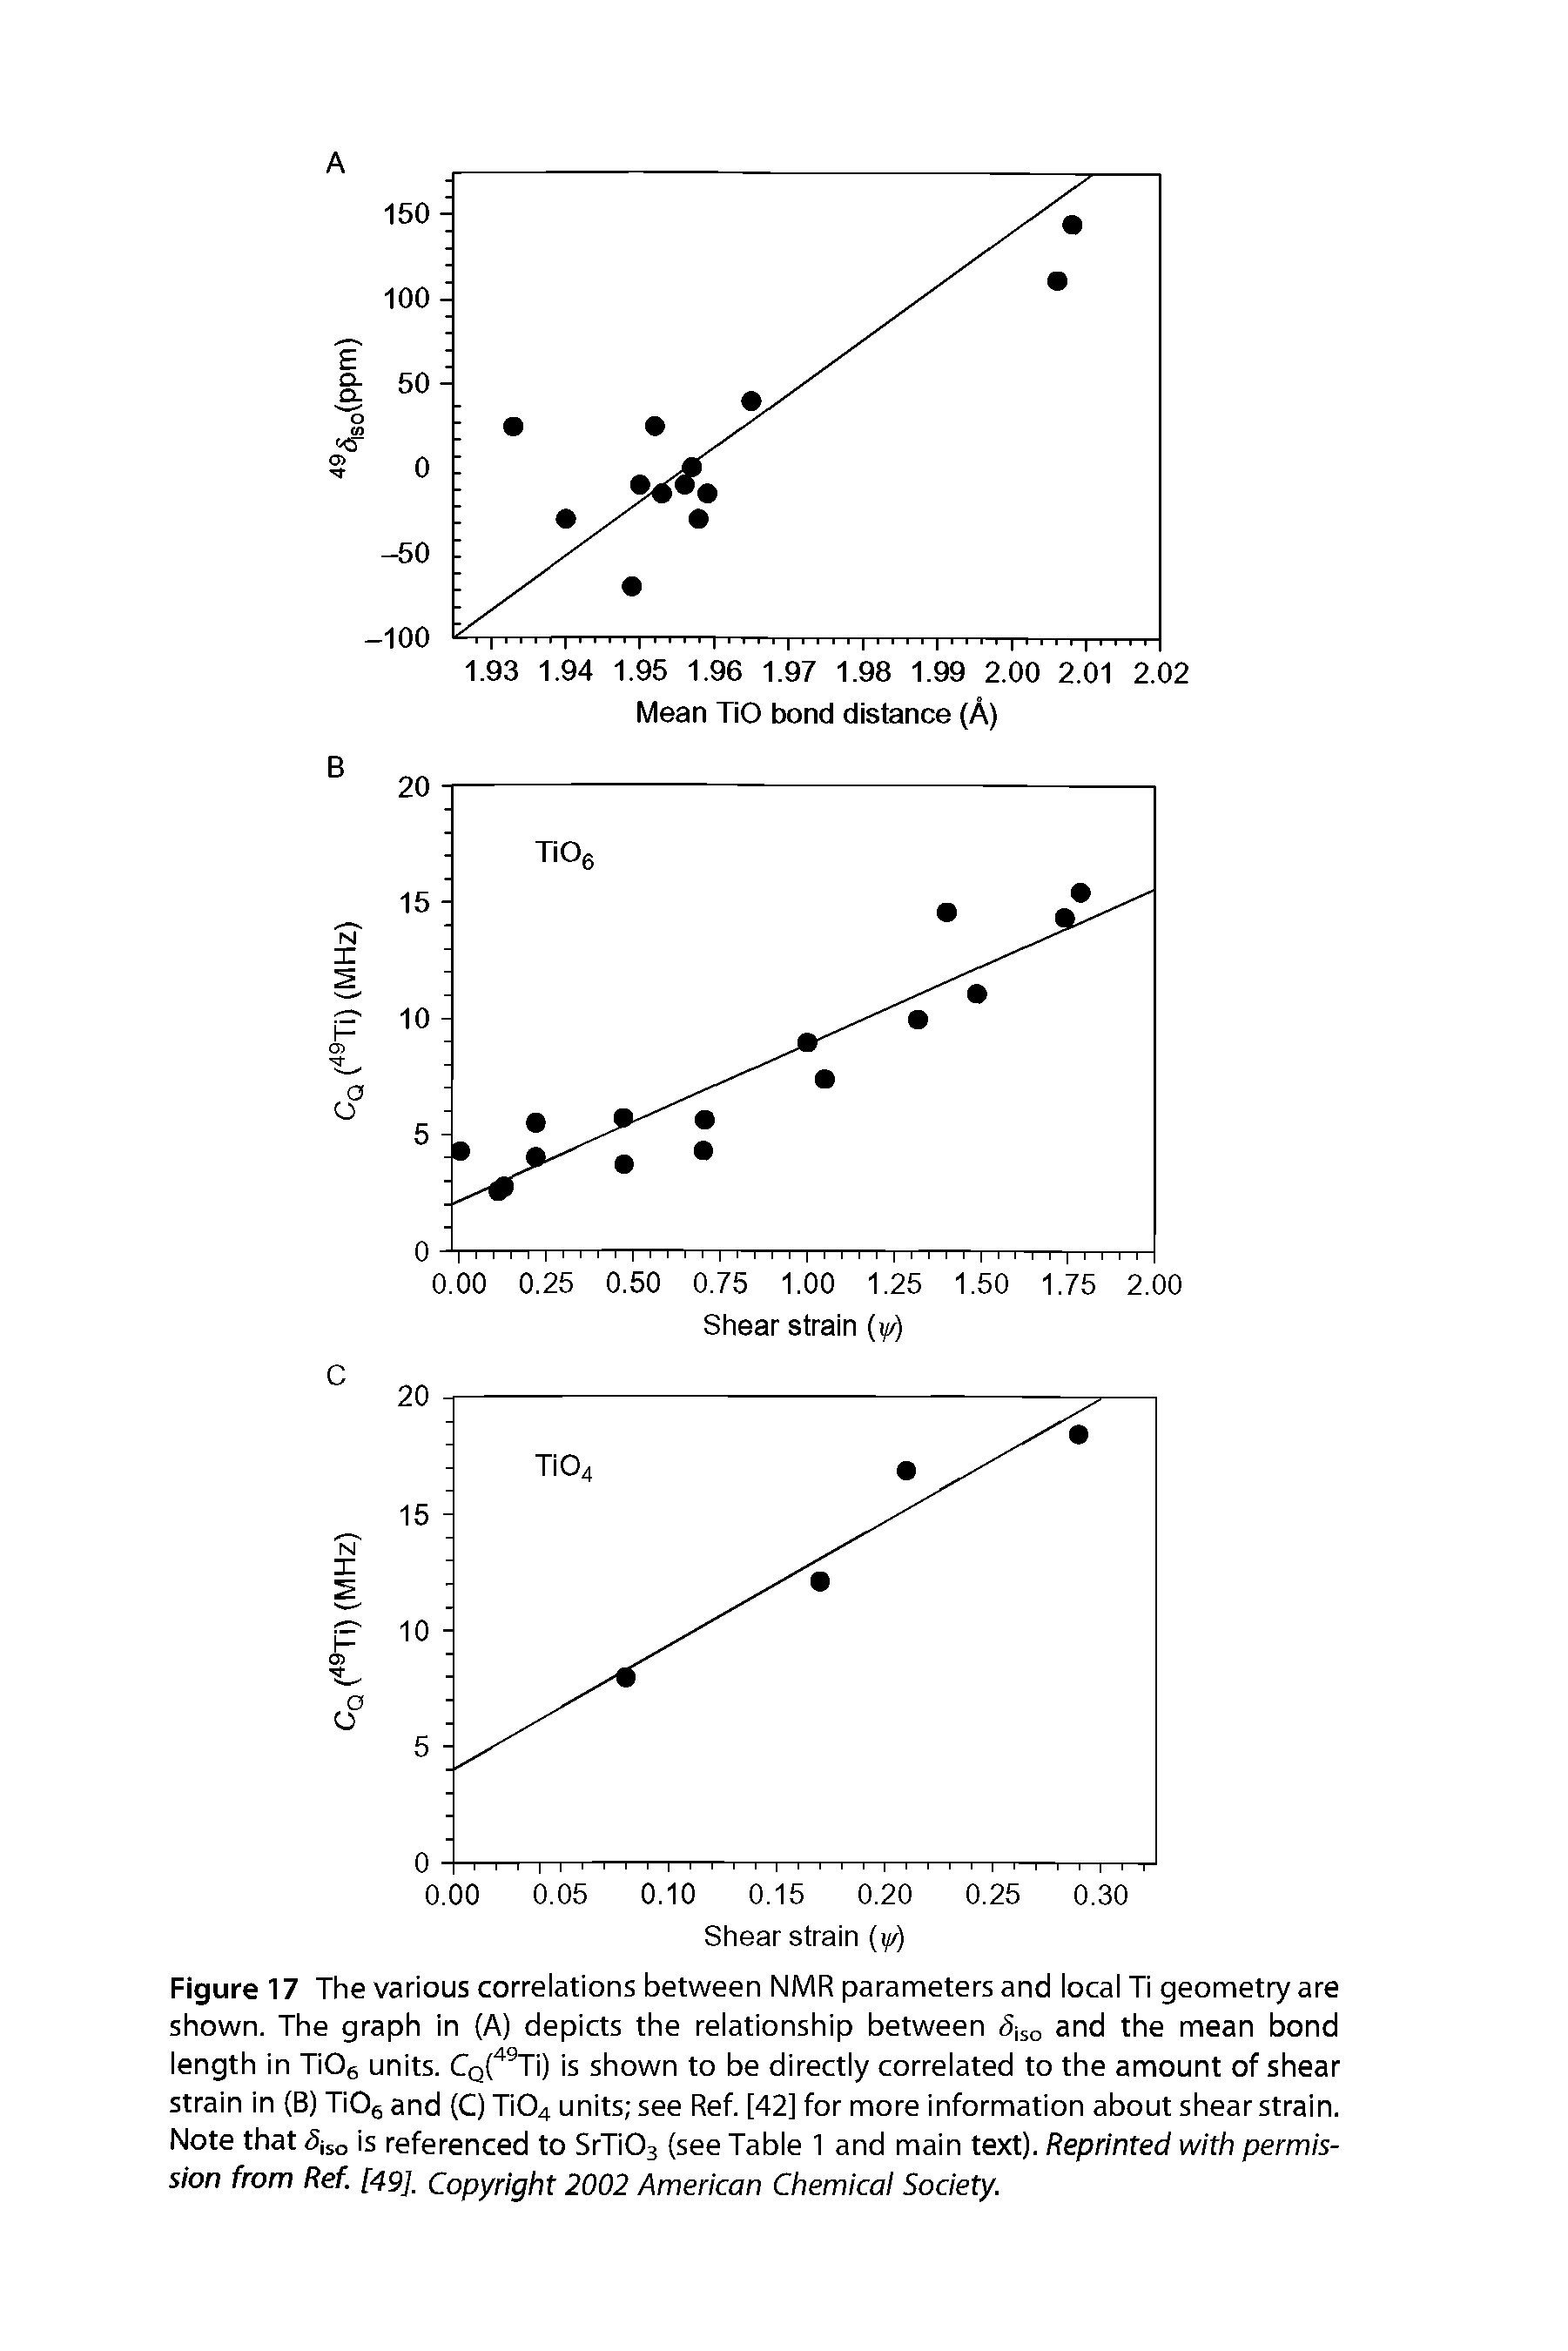 Figure 17 The various correiations between NMR parameters and locai Ti geometry are shown. The graph in (A) depicts the reiationship between Siso and the mean bond length in TiOg units. Cq( TI) is shown to be directly correlated to the amount of shear strain in (B) TiOg and (C) Ti04 units see Ref. [42] for more information about shear strain. Note that iso is referenced to SrTiOs (see Table 1 and main text). Reprinted with permission from Ref. [49], Copyright 2002 American Chemical Society.